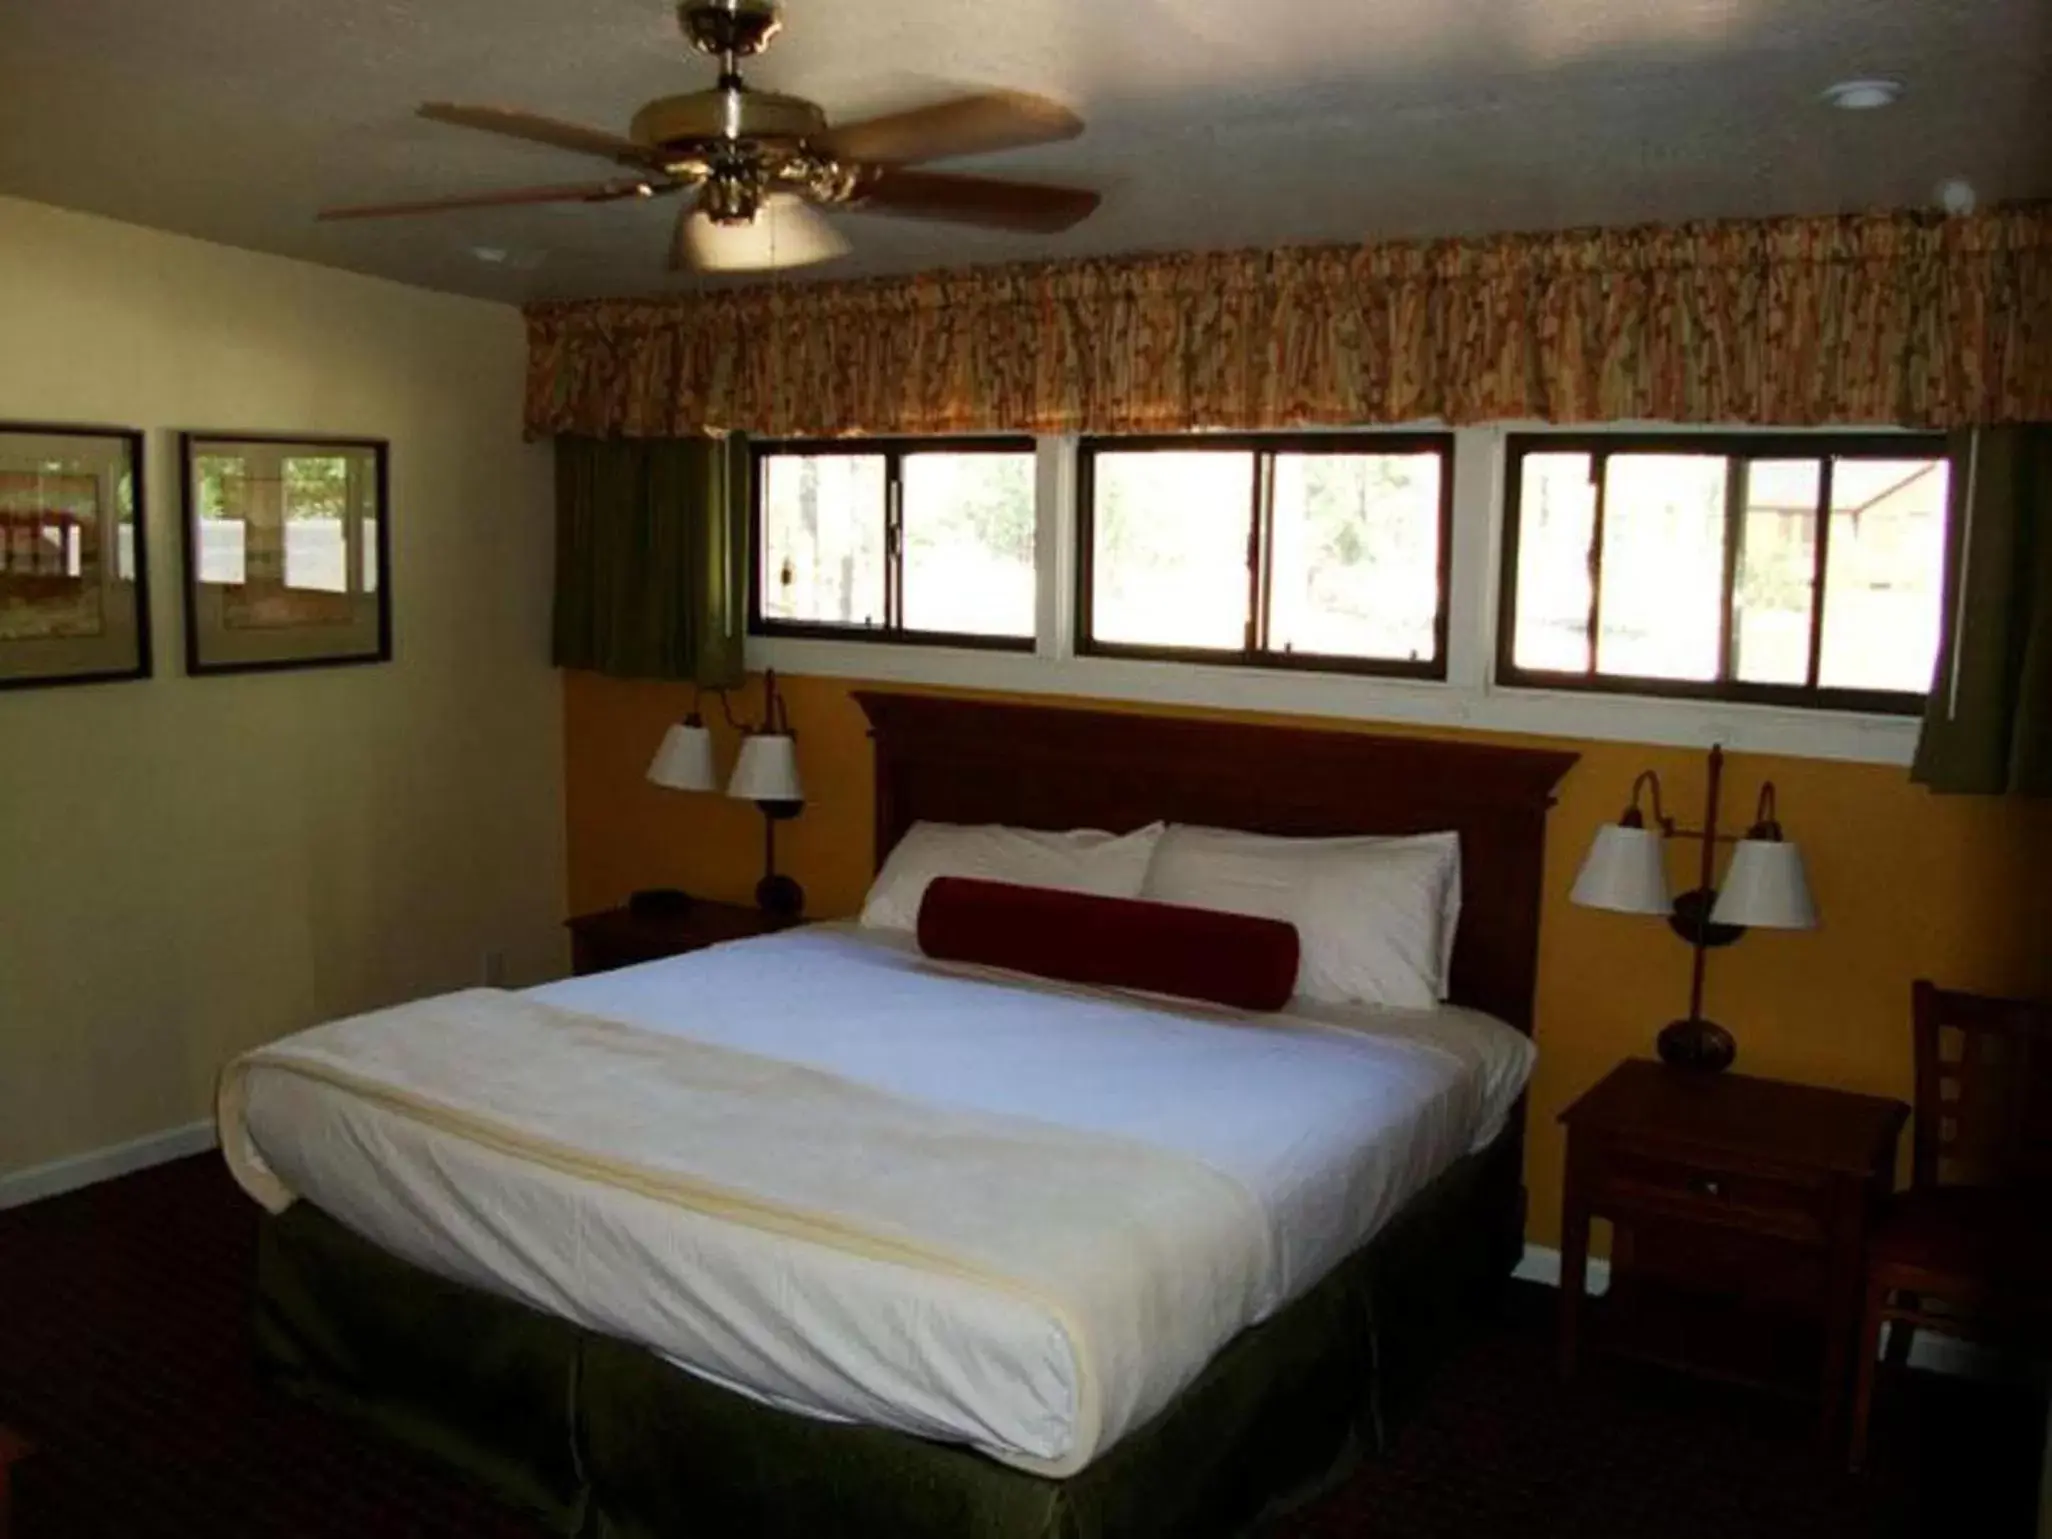 Bed in Roundhouse Resort, a VRI resort